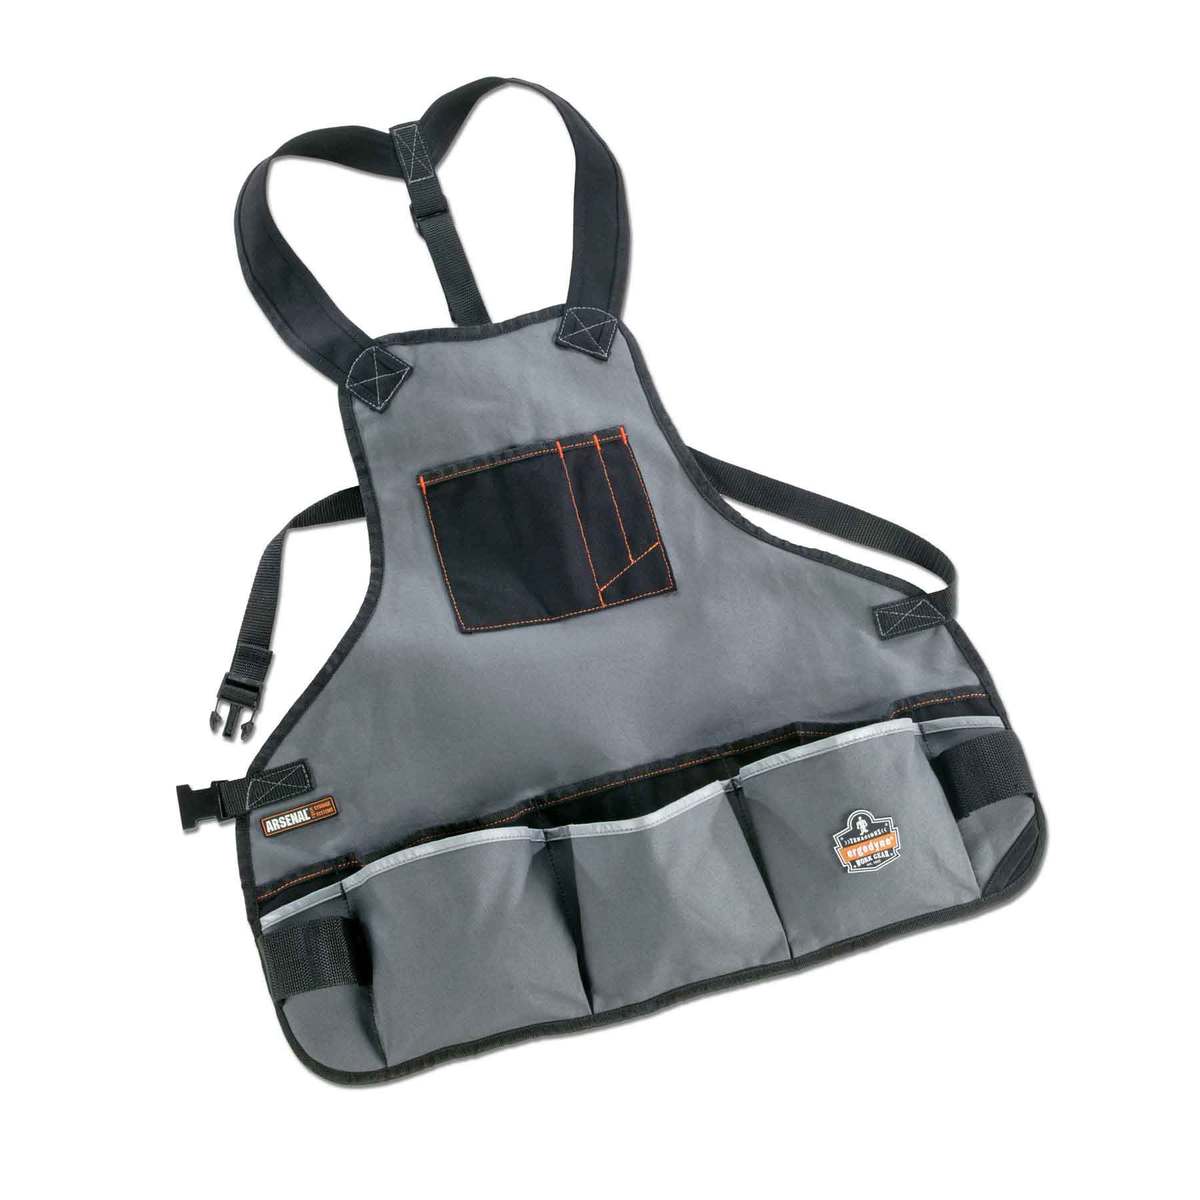 Ergodyne One Size Fits All Gray Arsenal® 5700 Cotton Duck Tool Apron With Buckle Closure